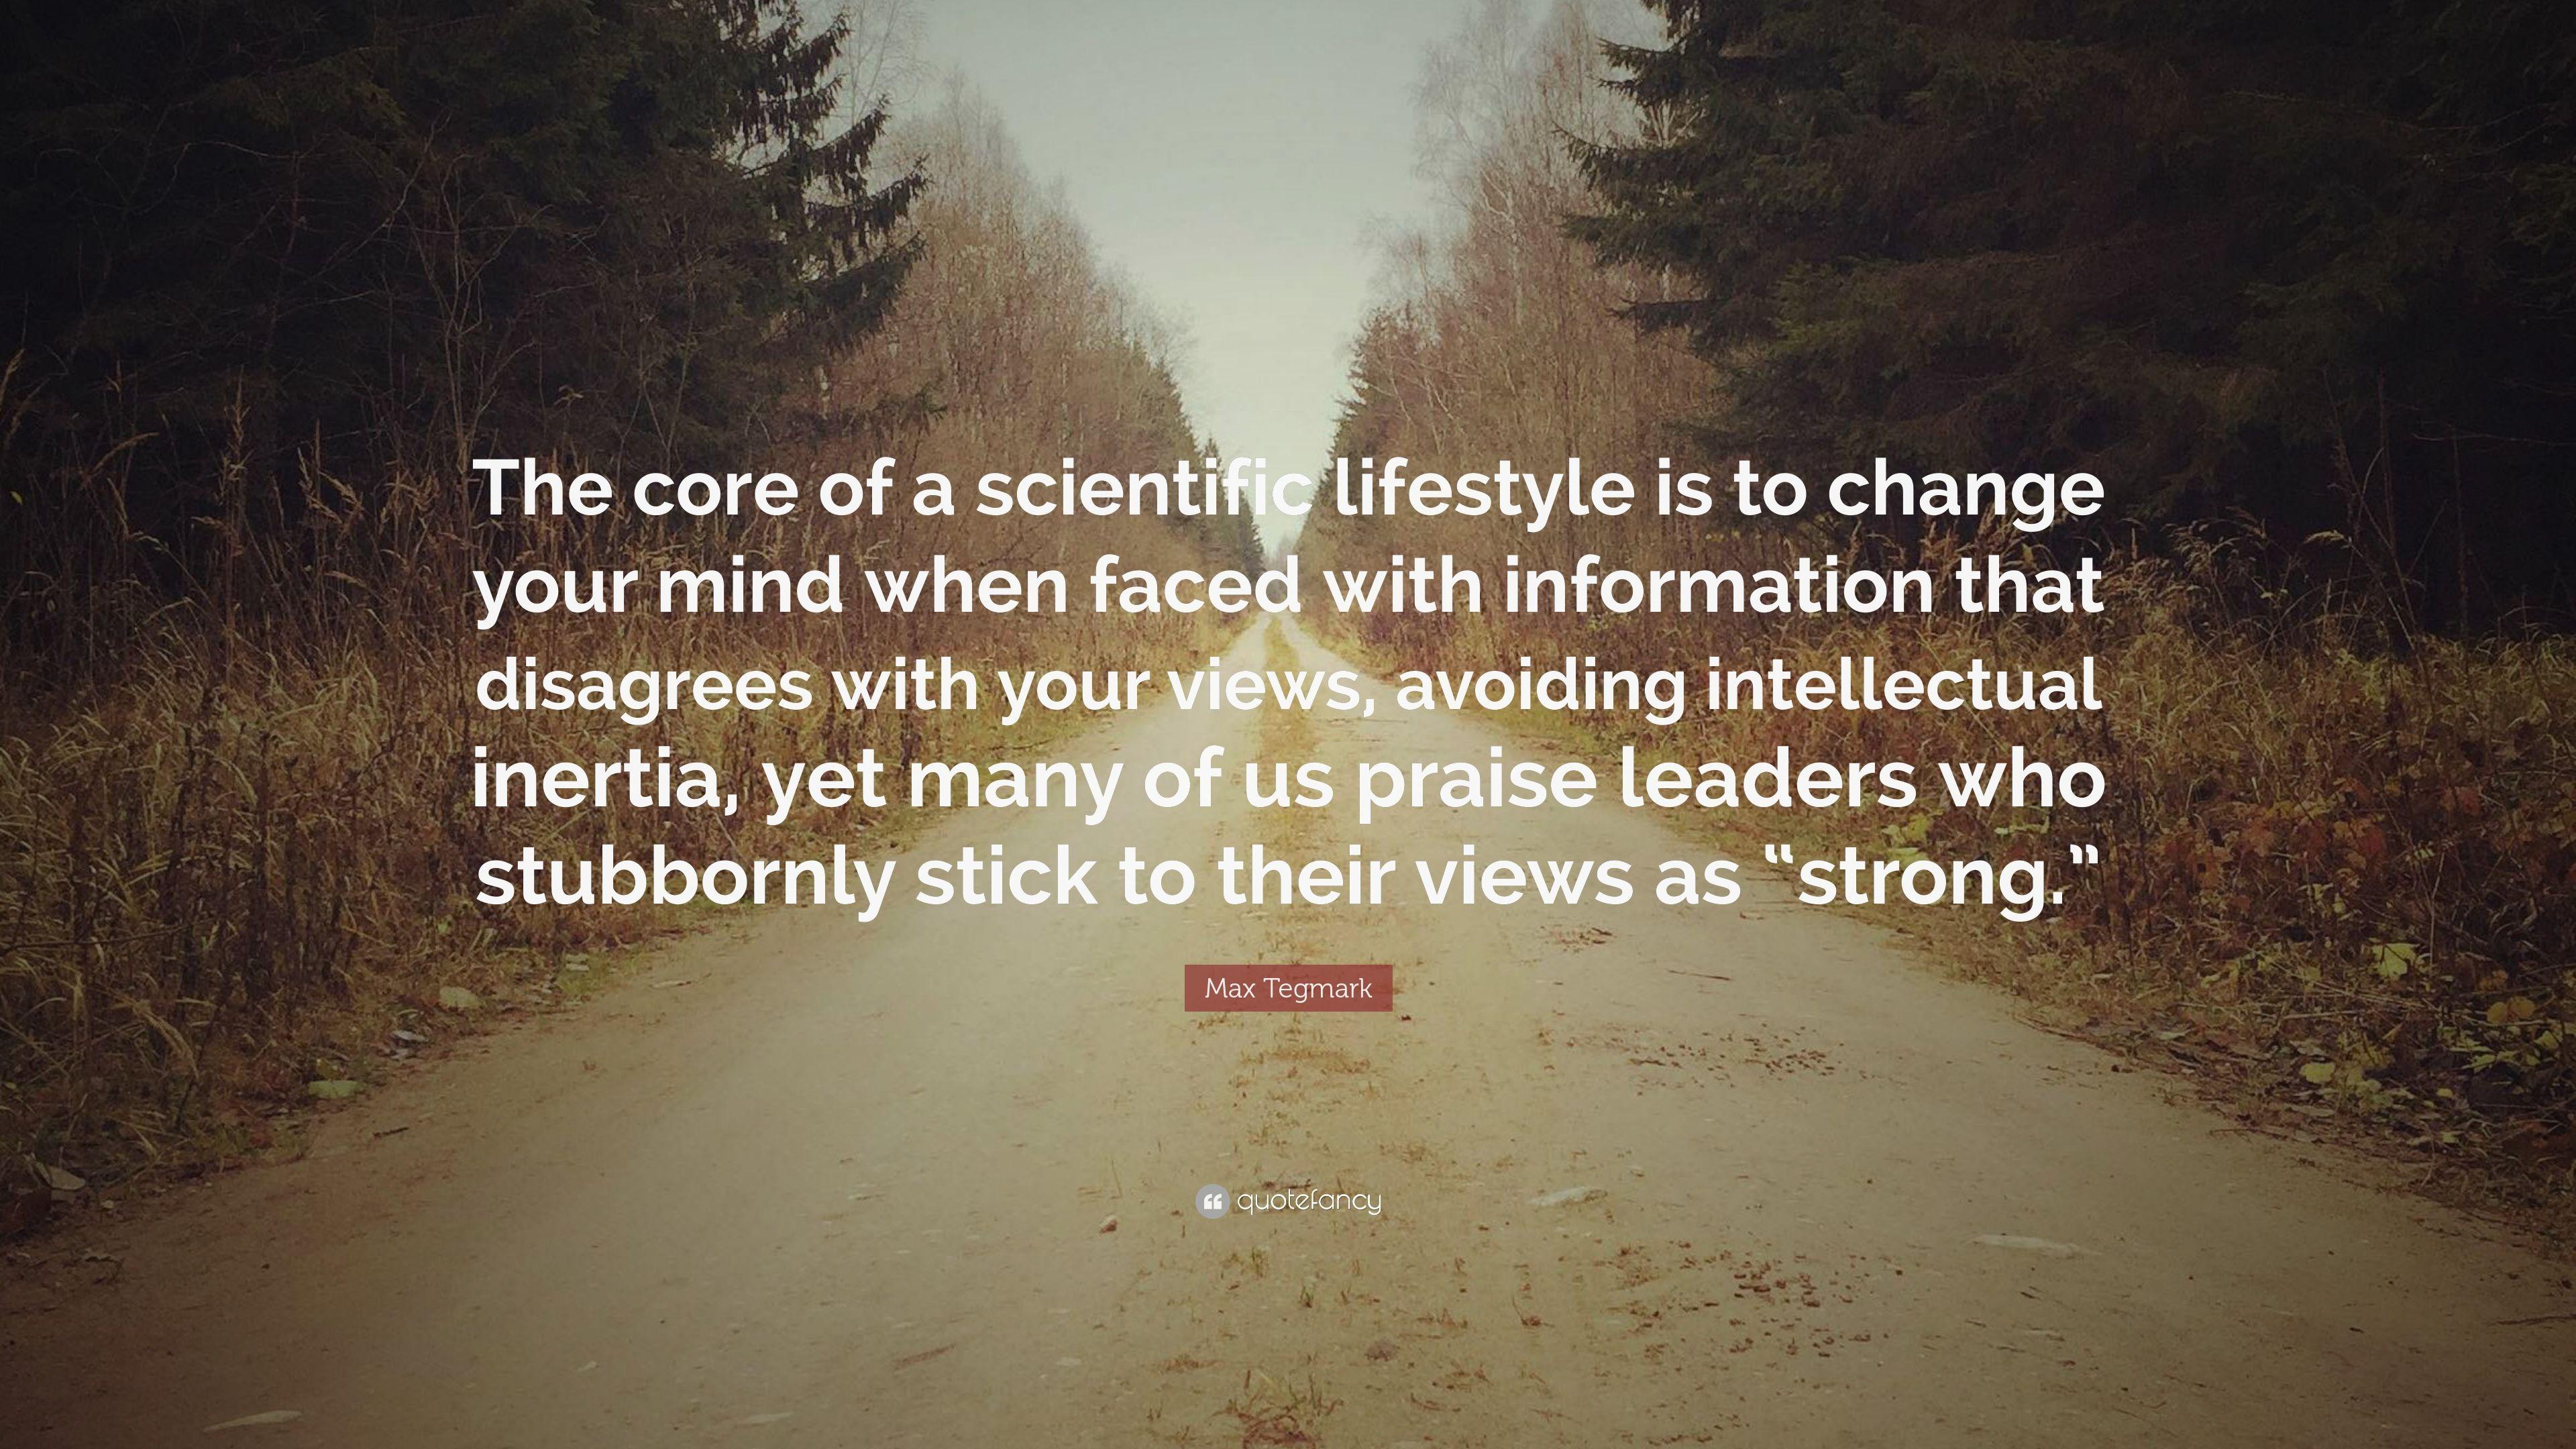 Max Tegmark Quote: “The core of a scientific lifestyle is to change